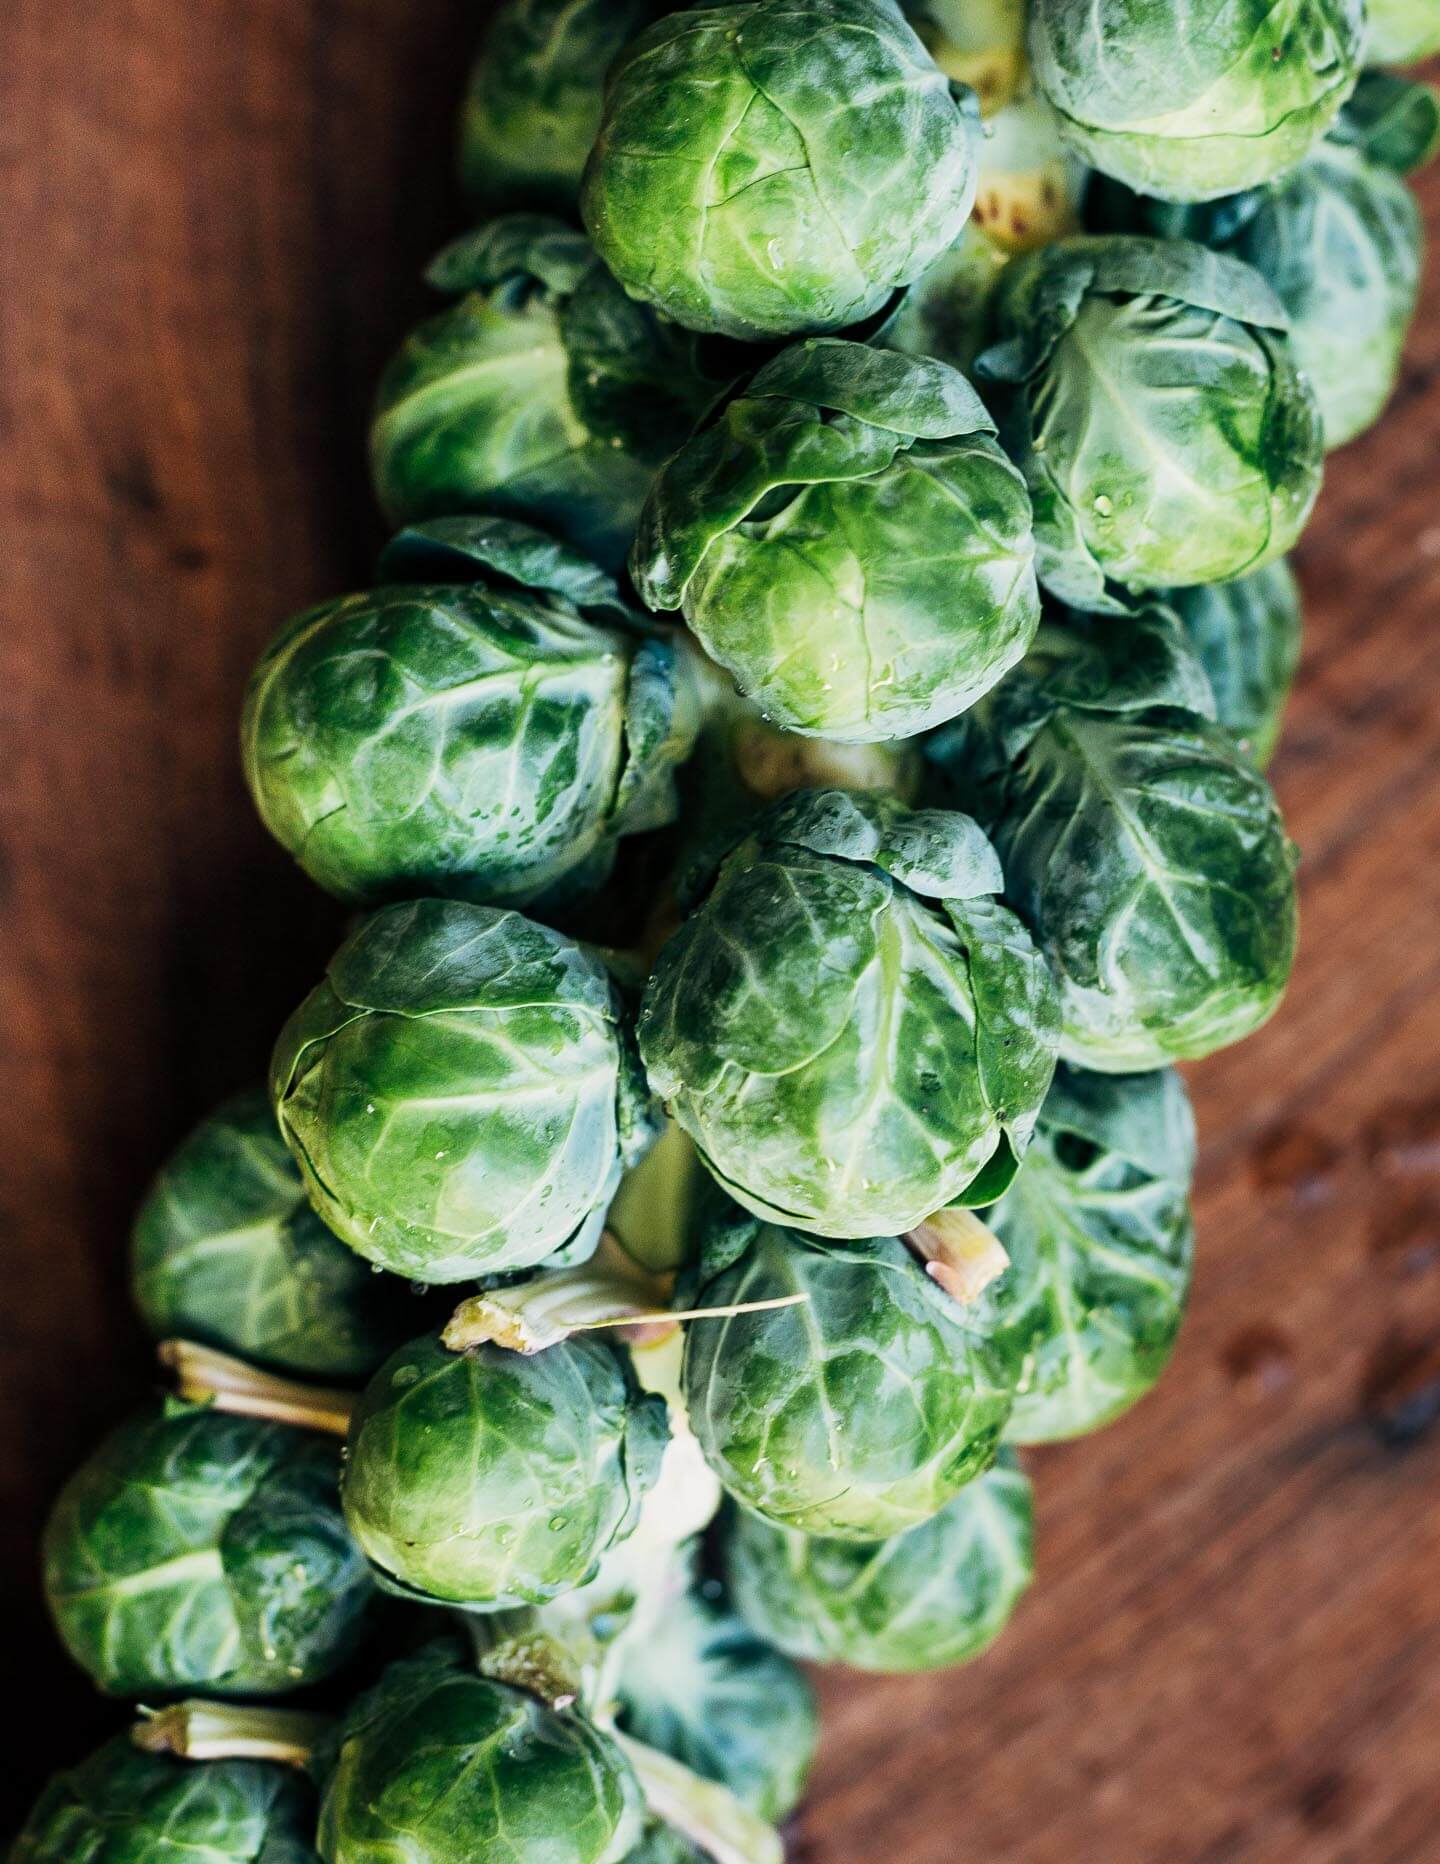 Brussels sprouts on the stalk